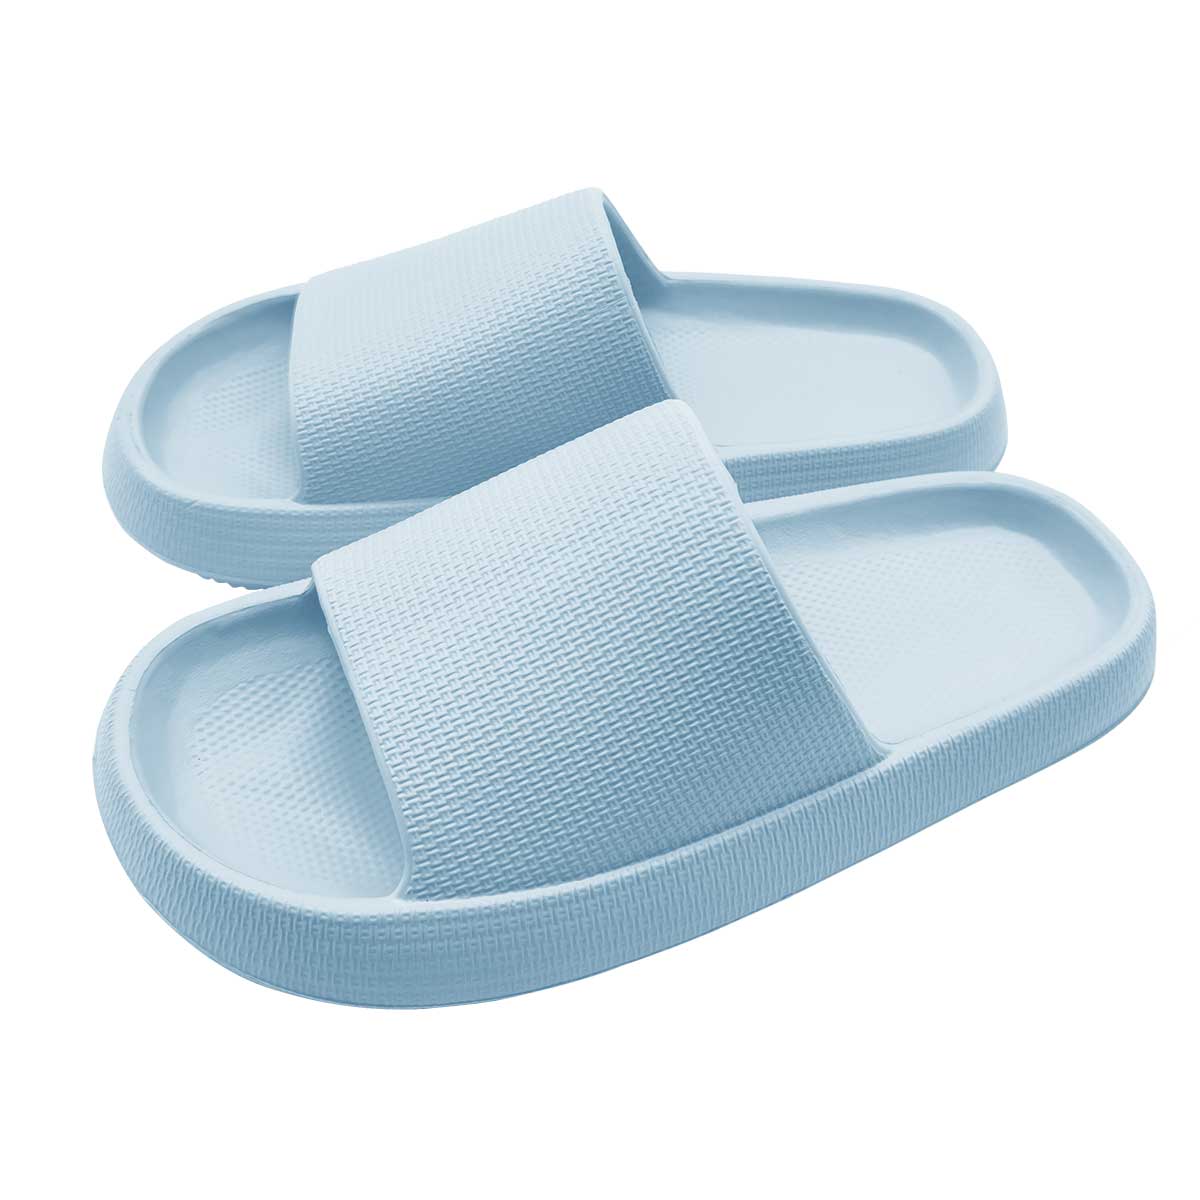 English) Foot Acupuncture Slippers Massage Shoes Sandals - Zen 5